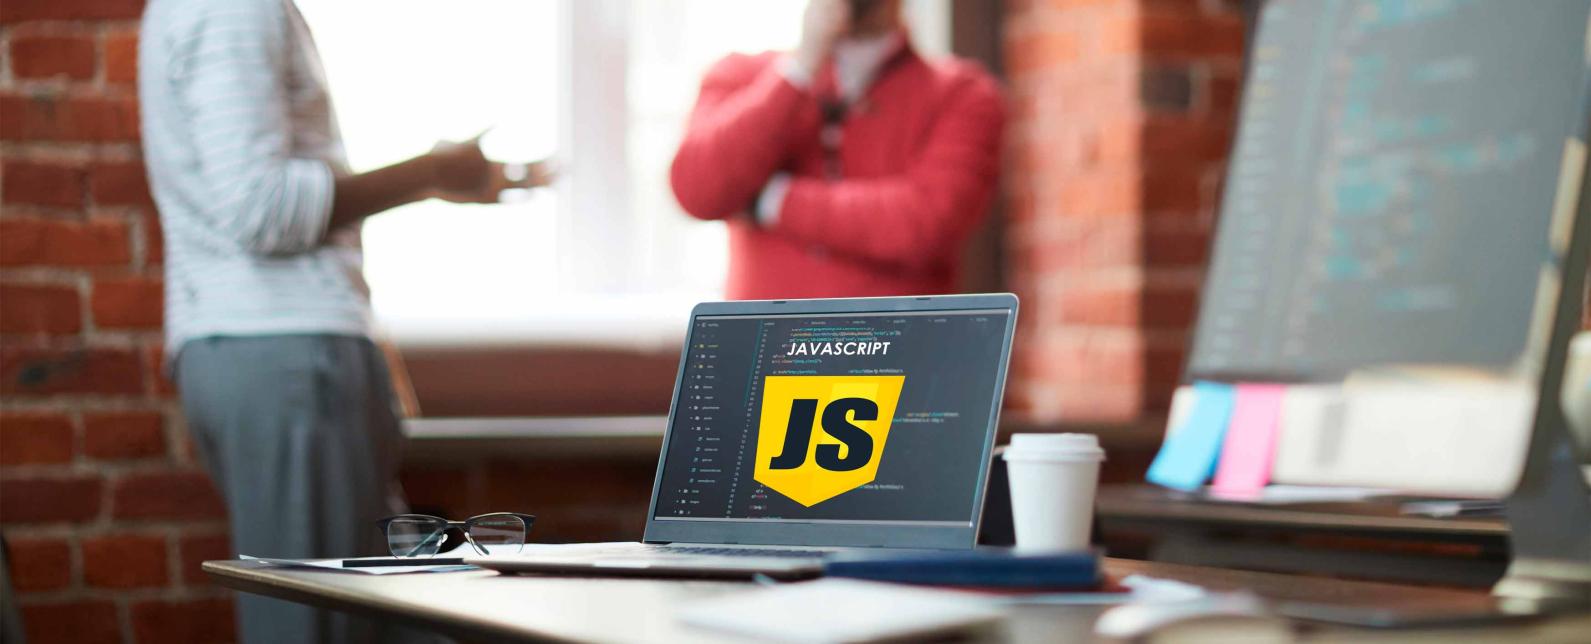 What Are the Future Trends in JavaScript Frameworks?